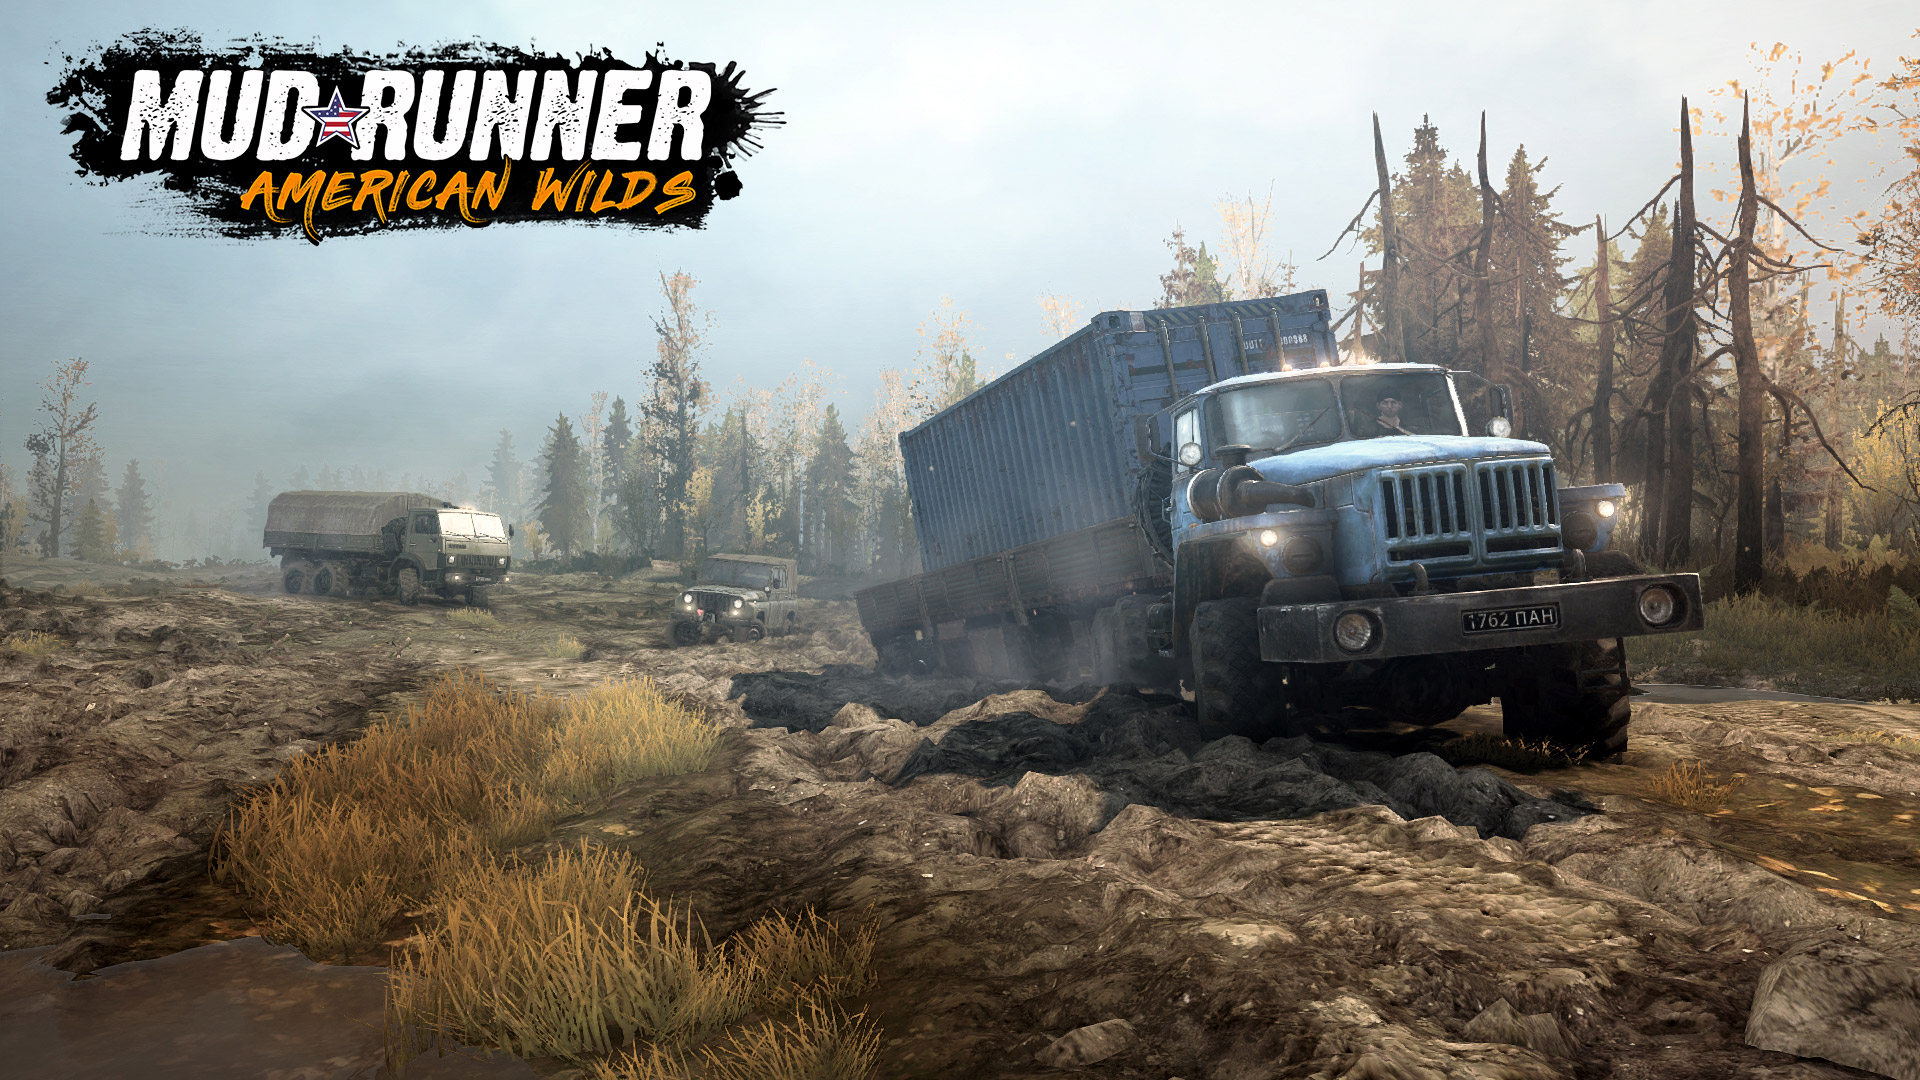 Expeditions a mudrunner game сохранения. MUDRUNNER American Wilds. MUDRUNNER American Wilds Edition. MUDRUNNER - American Wilds Expansion. MUDRUNNER лого.